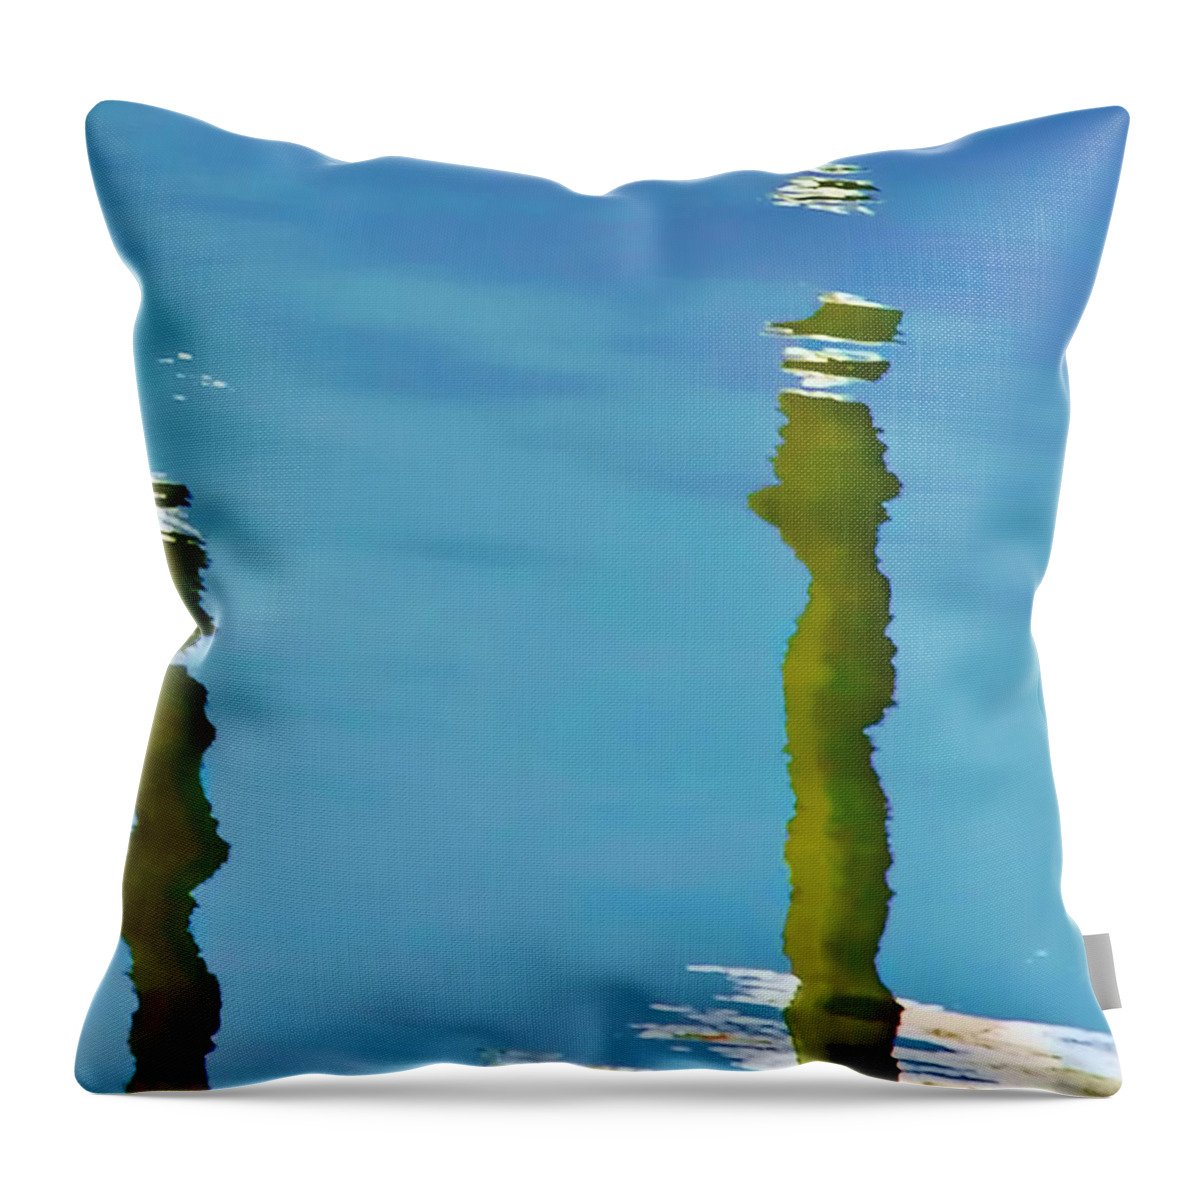 Water Throw Pillow featuring the photograph Abstract Reflection In River by Gary Slawsky